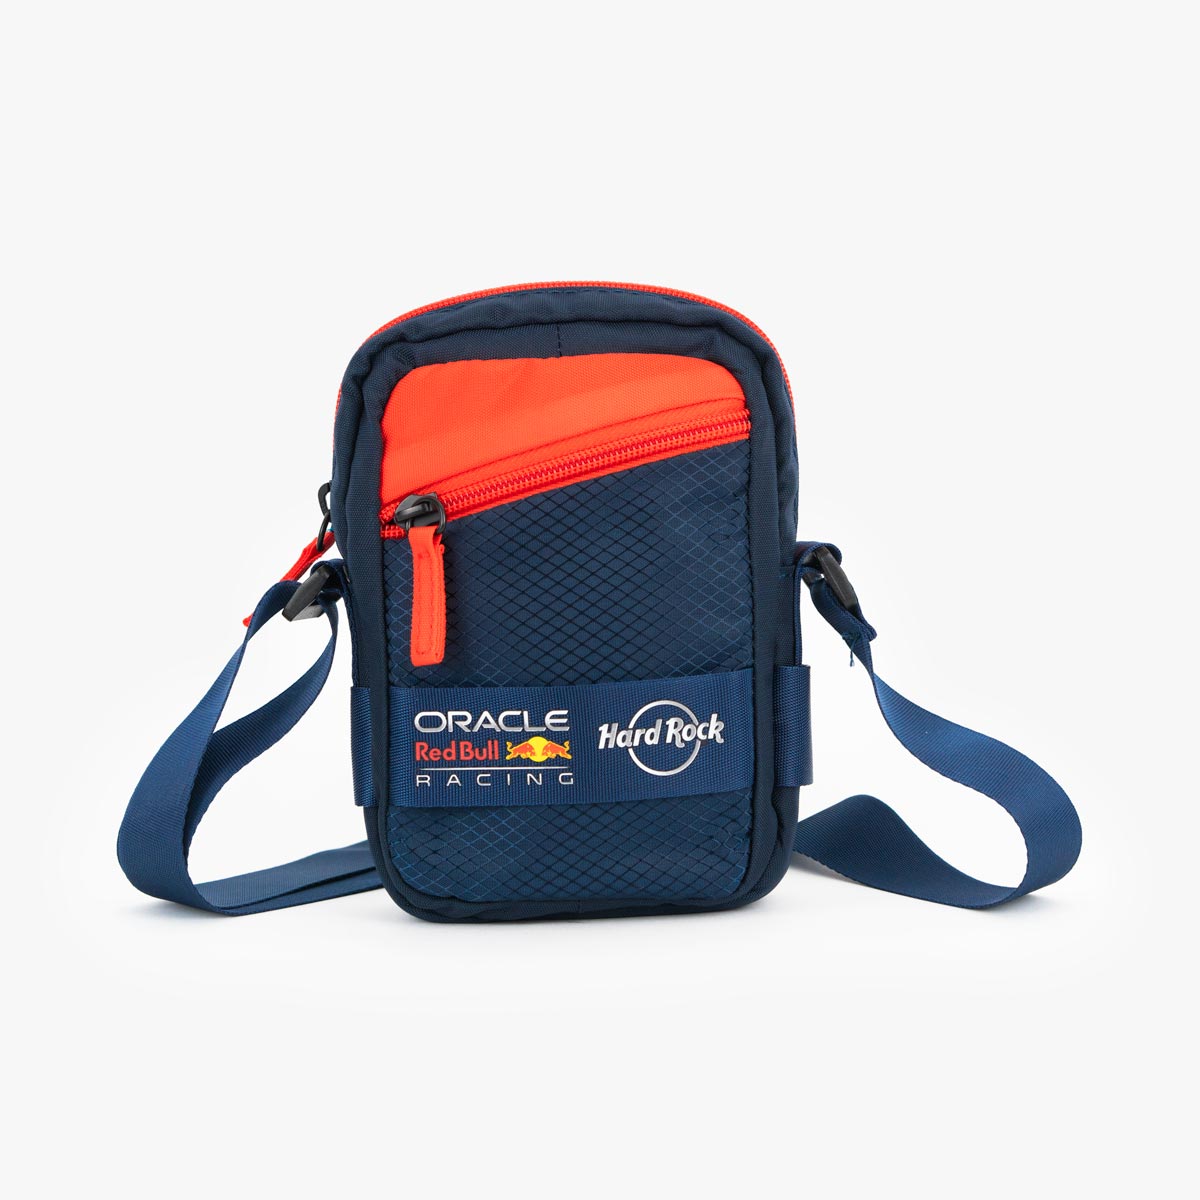 Oracle Red Bull Jetset Crossbody Bag in Navy Blue image number 1